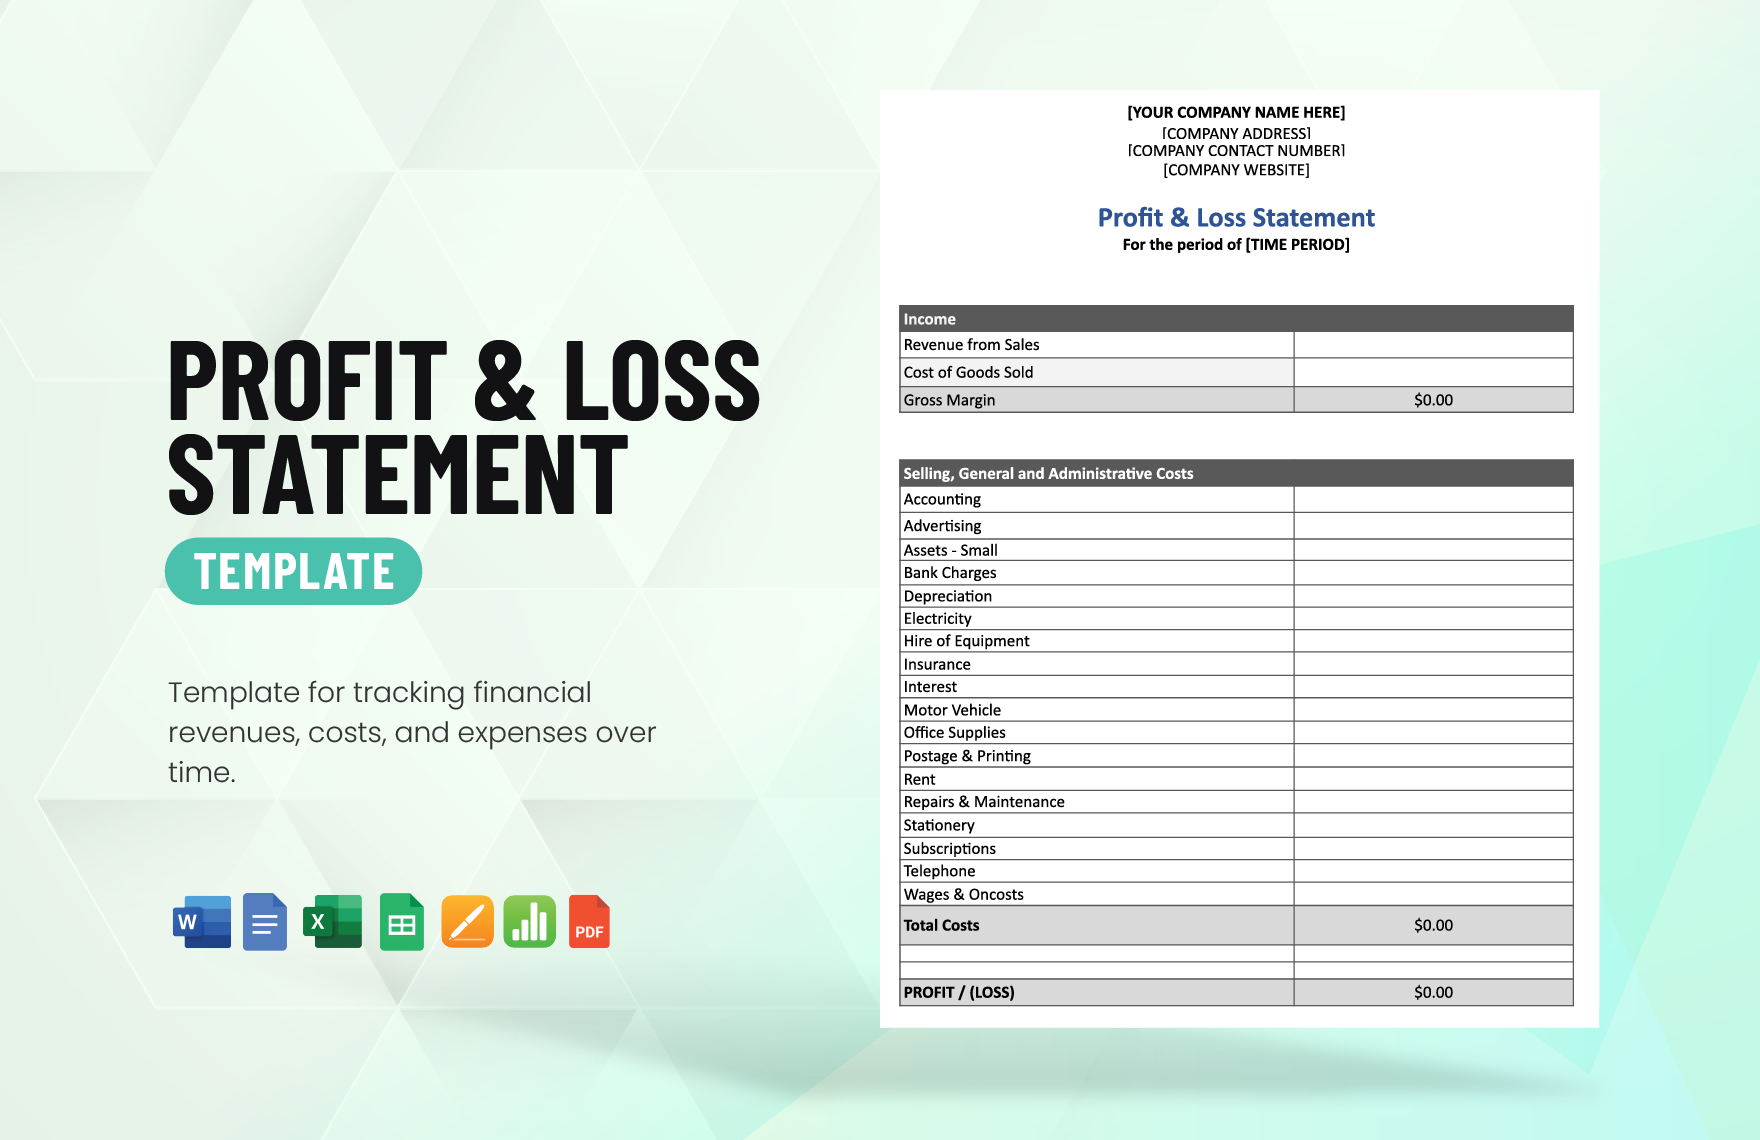 Profit & Loss Statement Template in Word, Google Docs, Excel, PDF, Google Sheets, Apple Pages, Apple Numbers